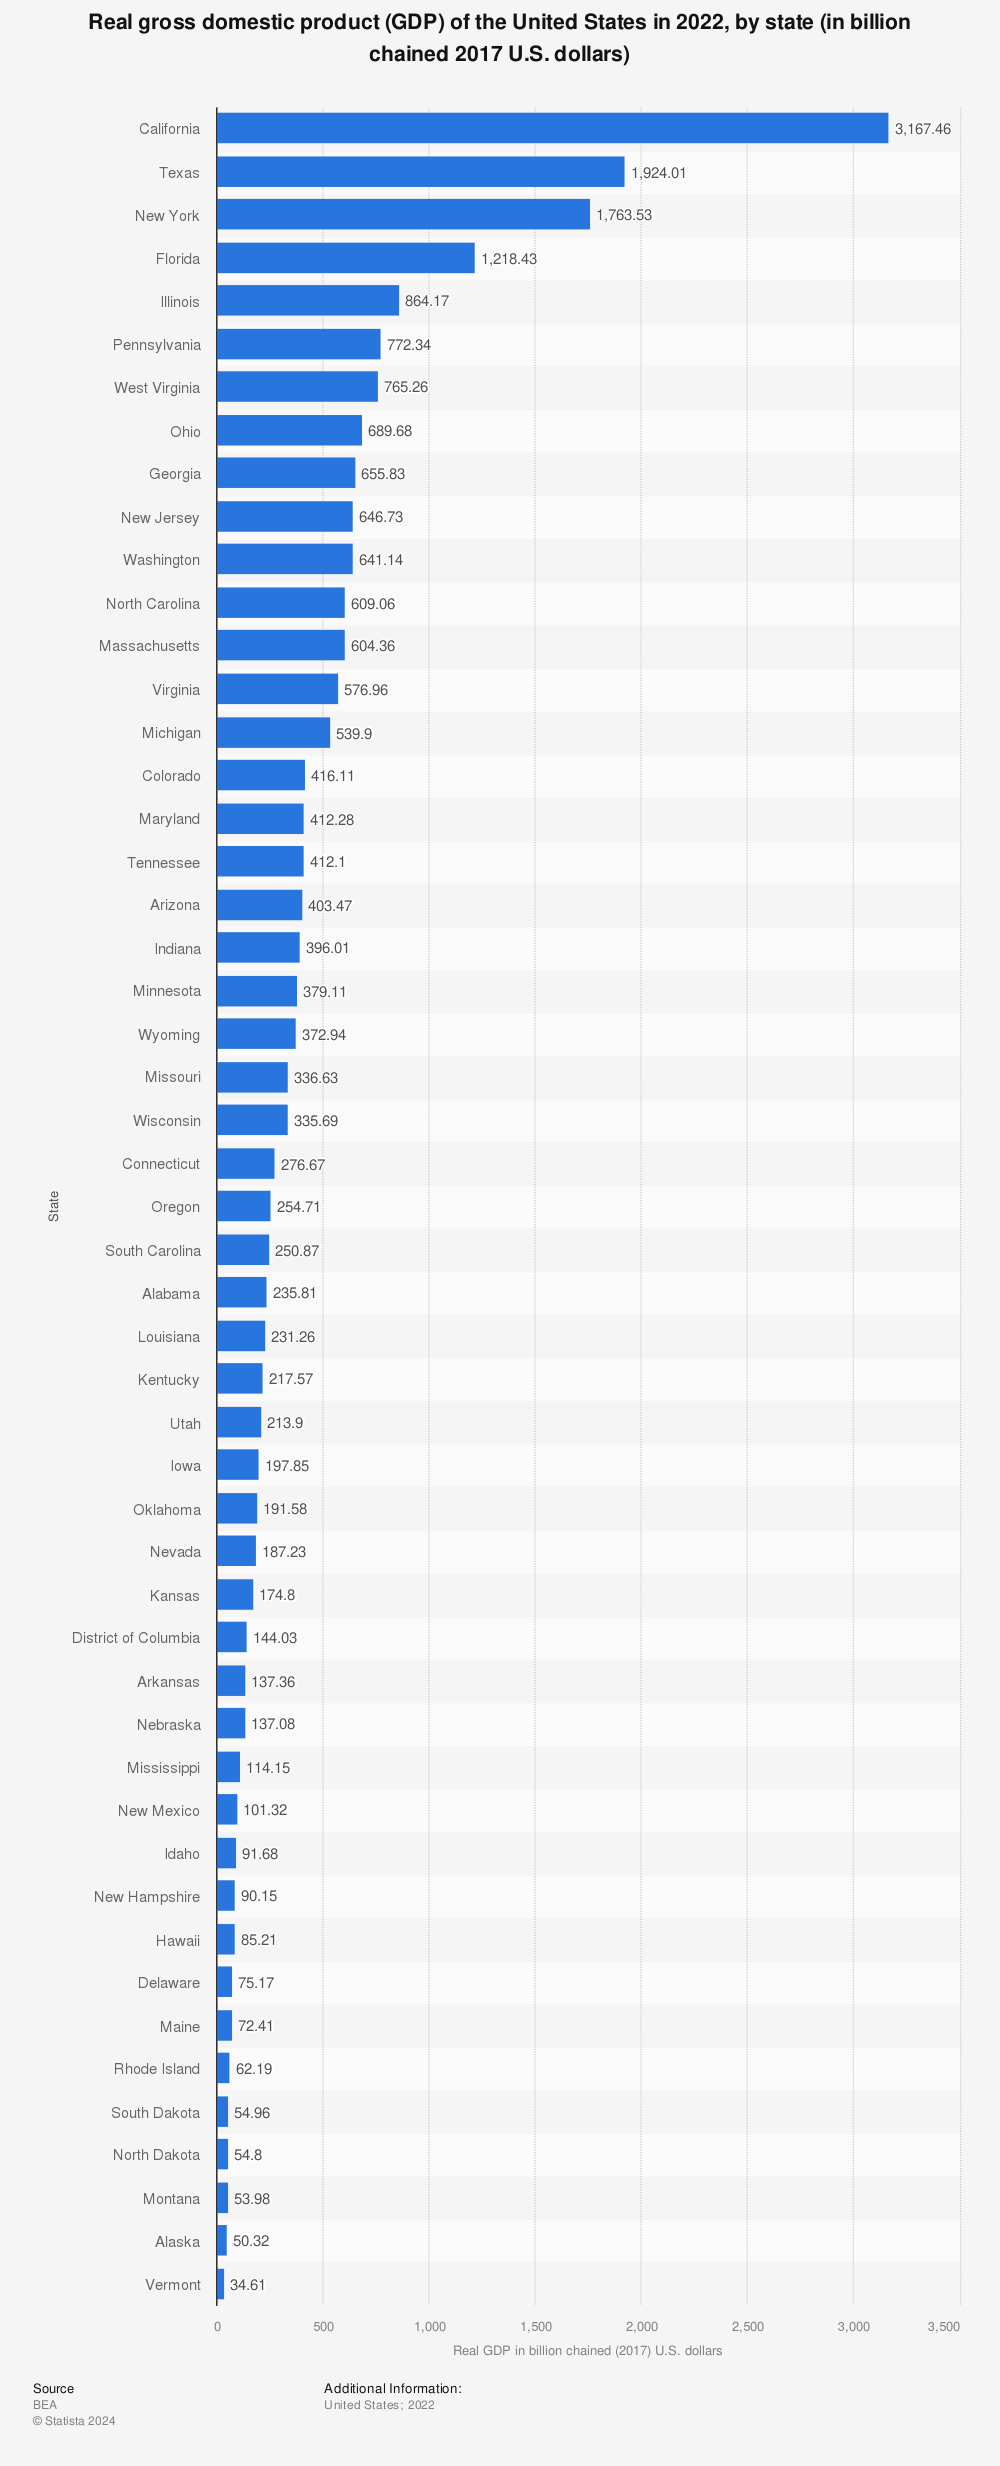 Statistic: Real Gross Domestic Product (GDP) of the United States in Q4 2021, by state (in billion chained 2012 U.S. dollars) | Statista